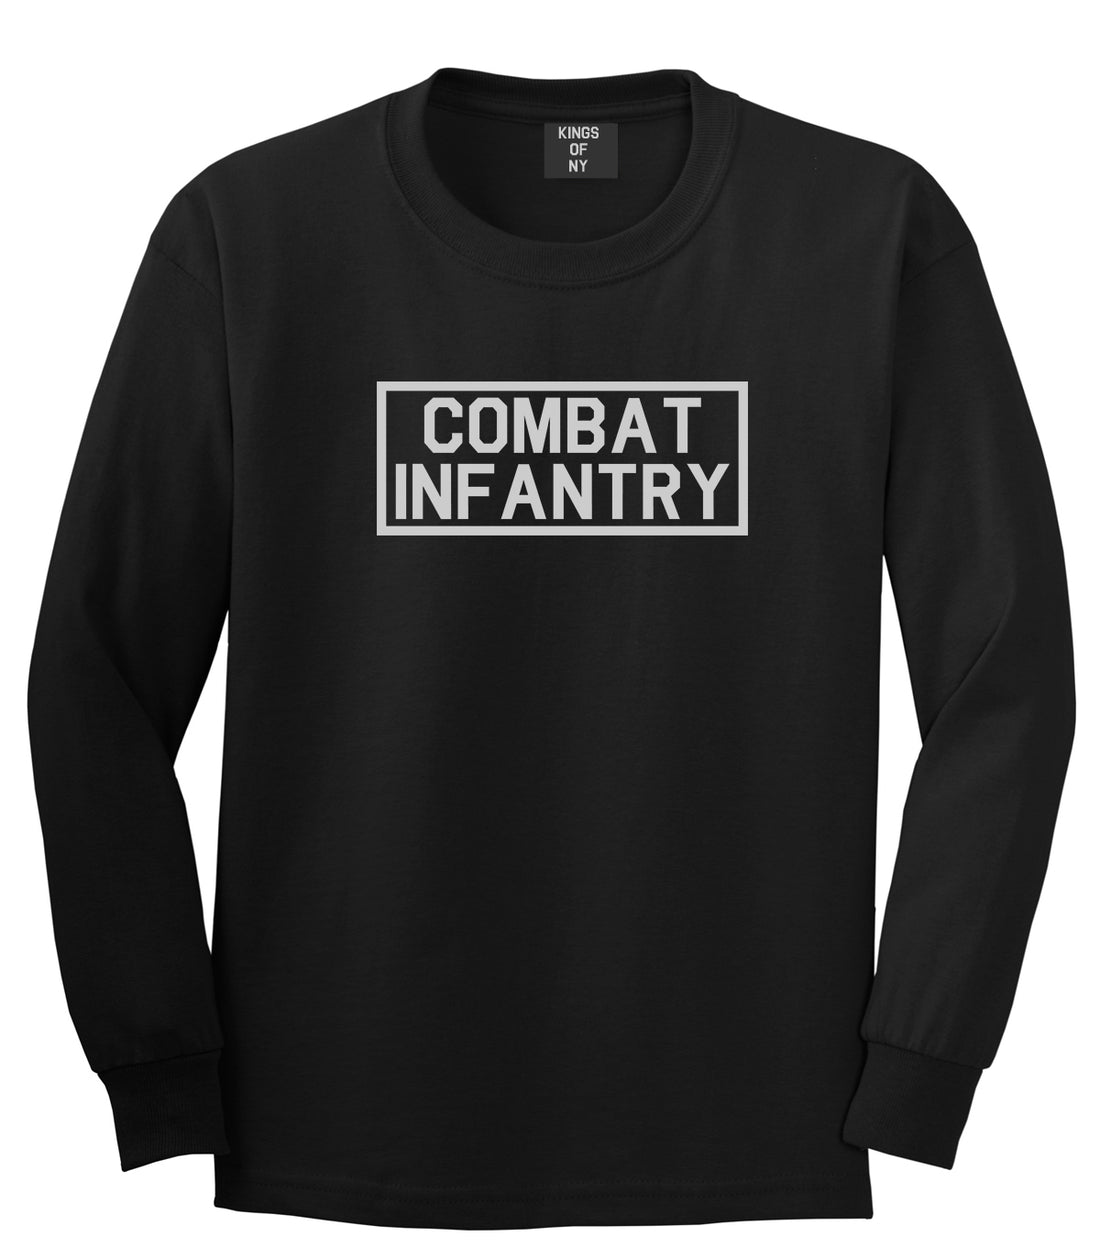 Combat Infantry Black Long Sleeve T-Shirt by Kings Of NY